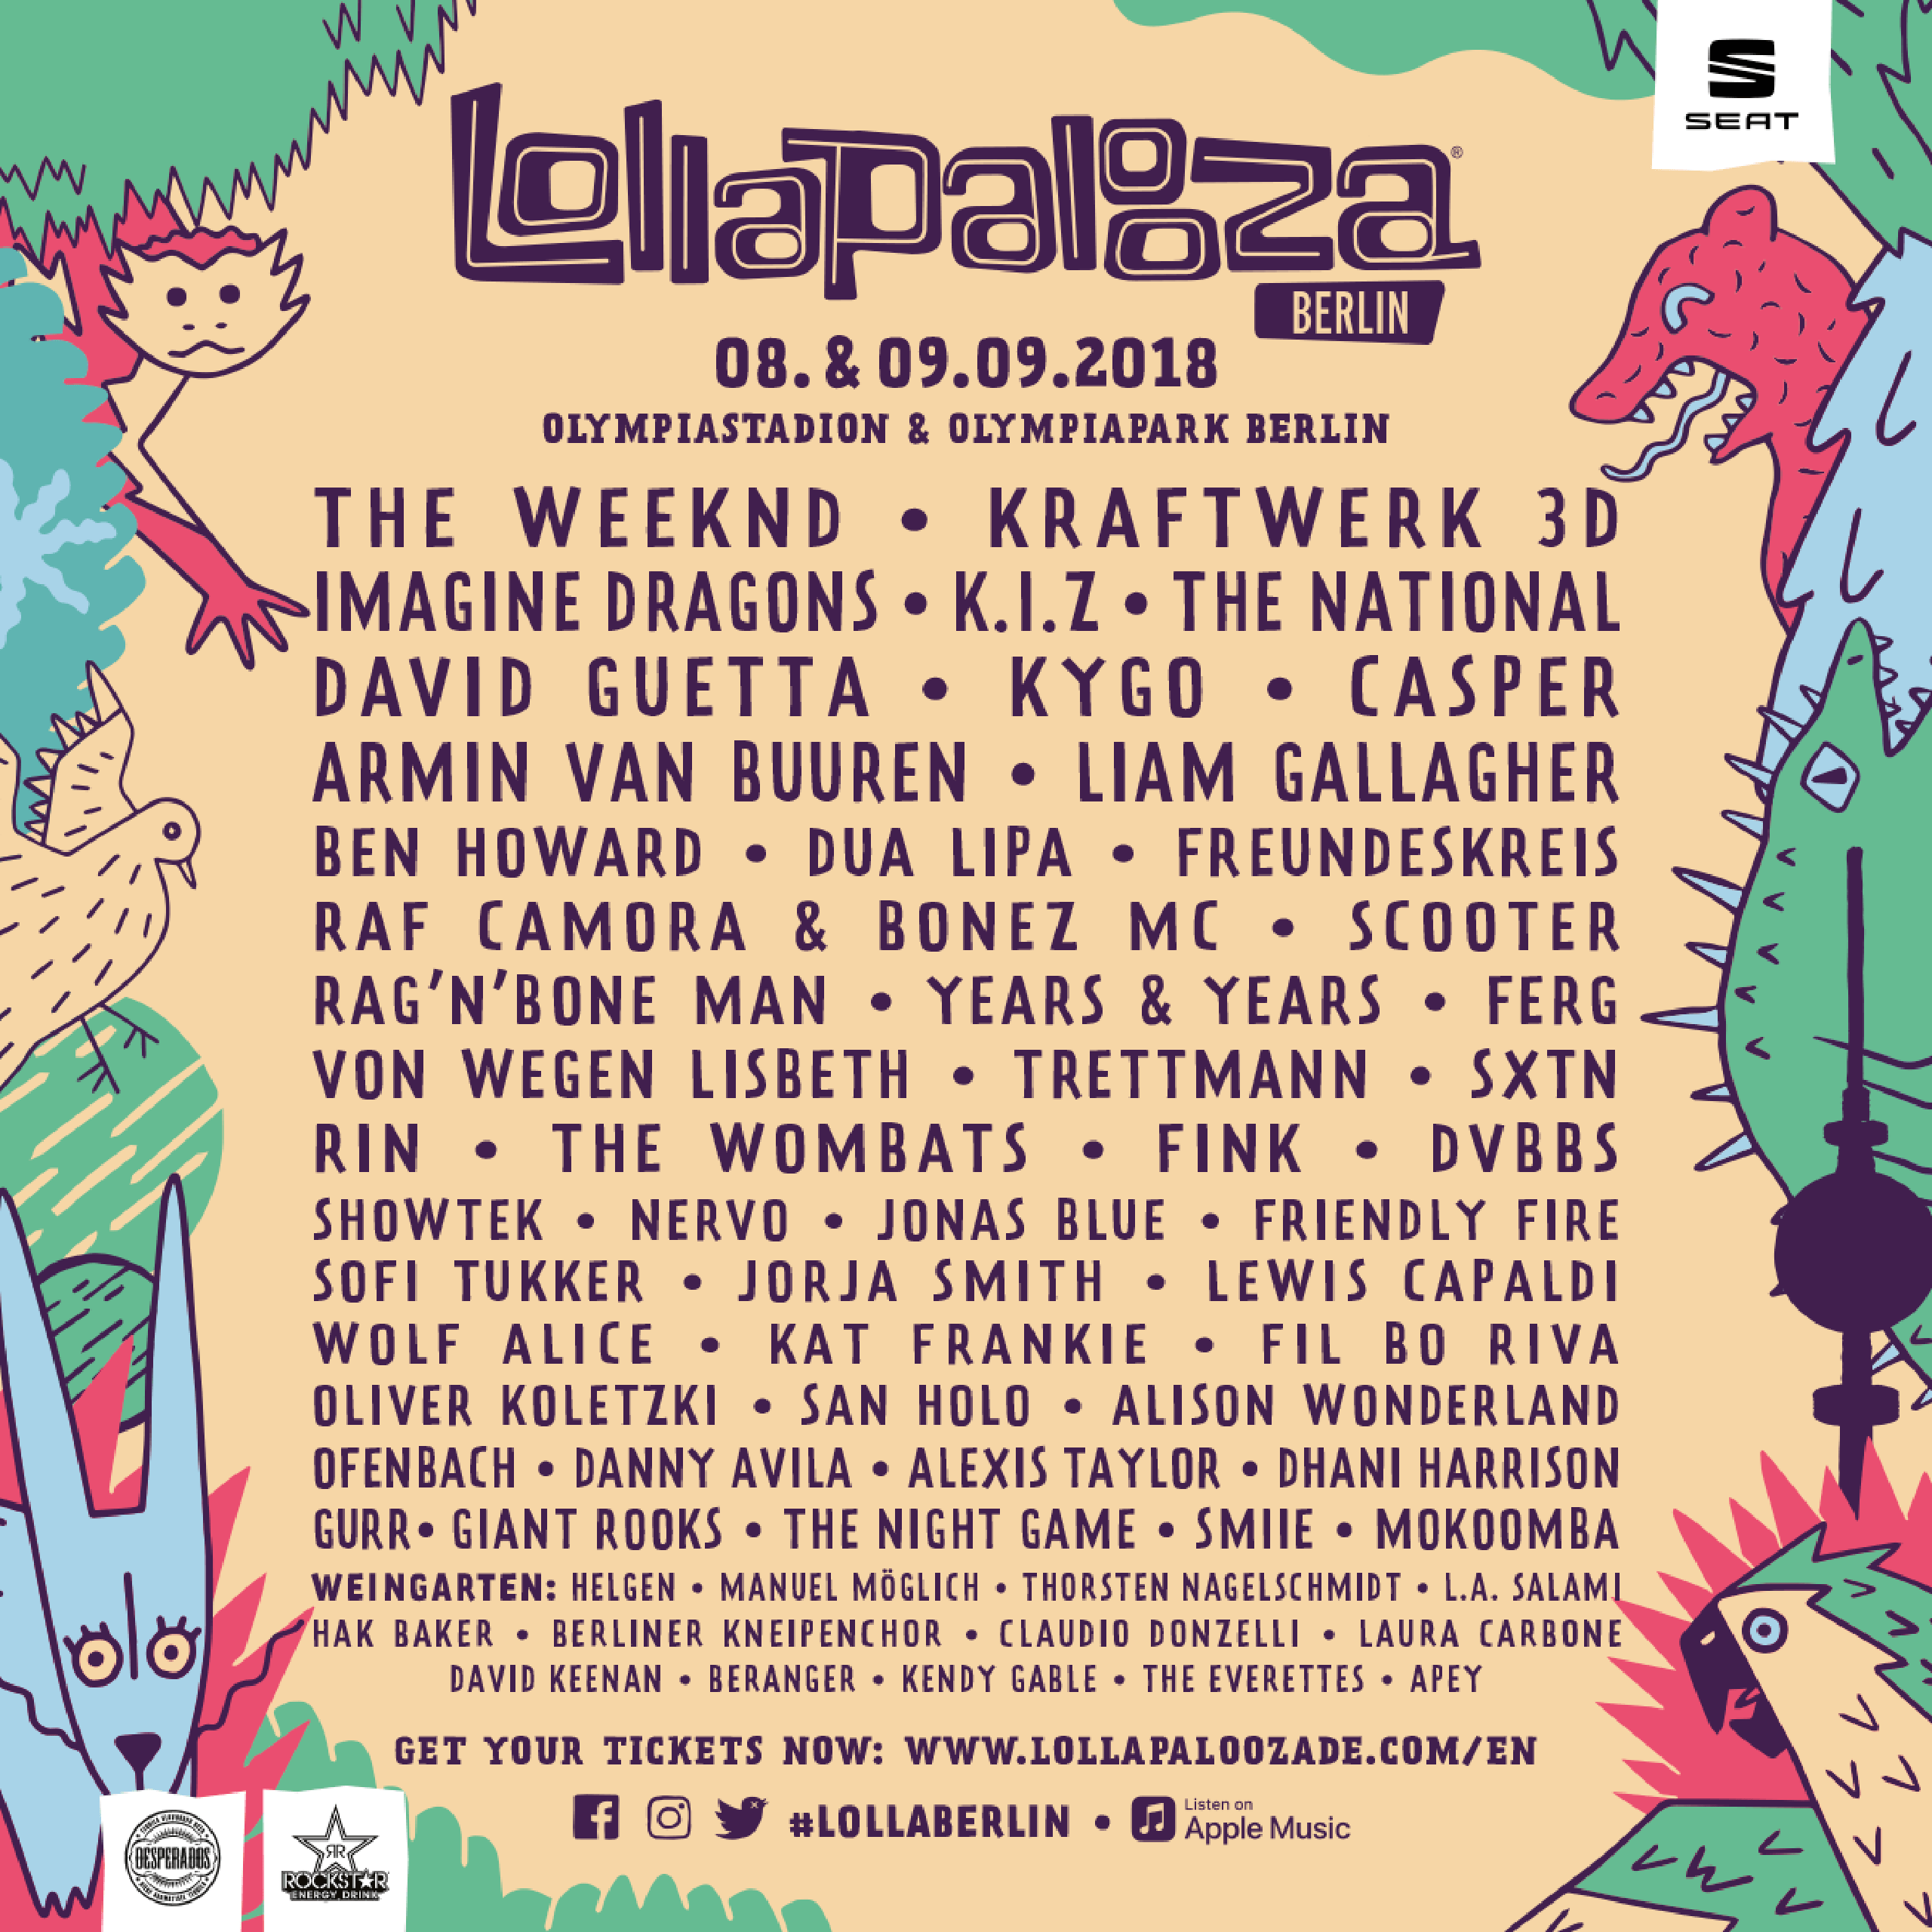 Lollapalooza Berlin 2018. Tickets, lineup, bands for Lollapalooza